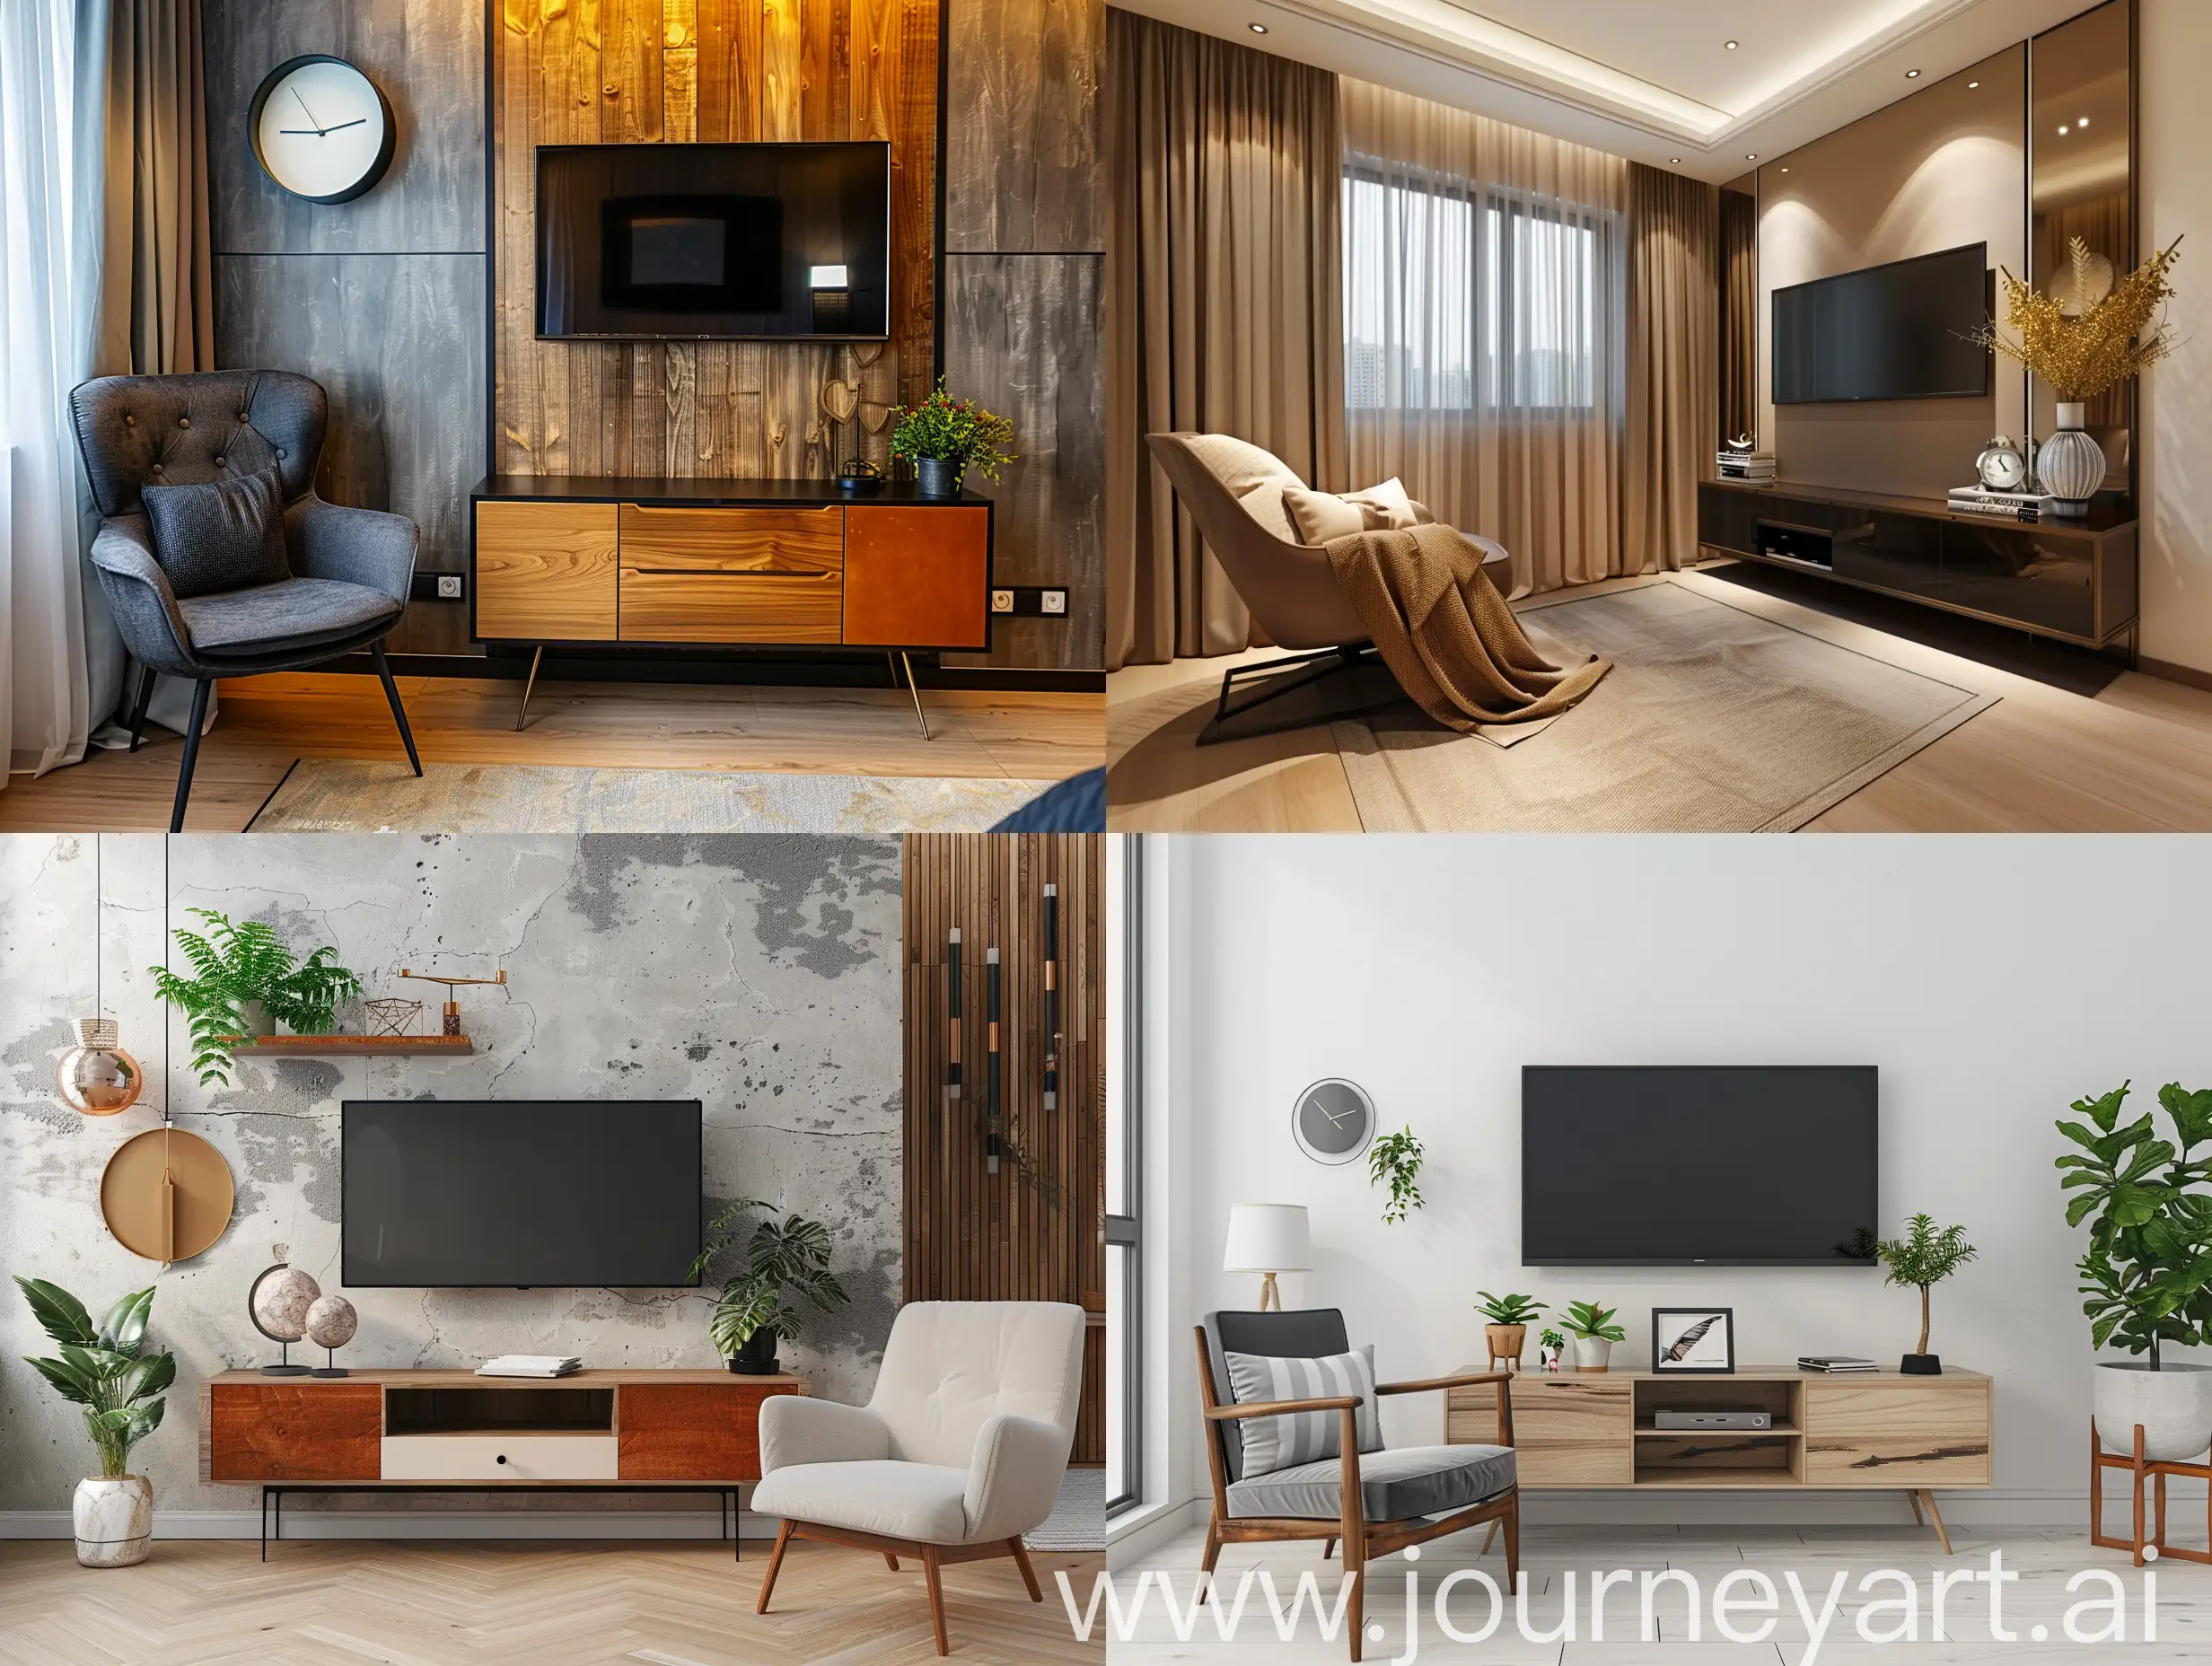 Modern-TV-Room-Interior-with-Stylish-Armchair-and-Decor